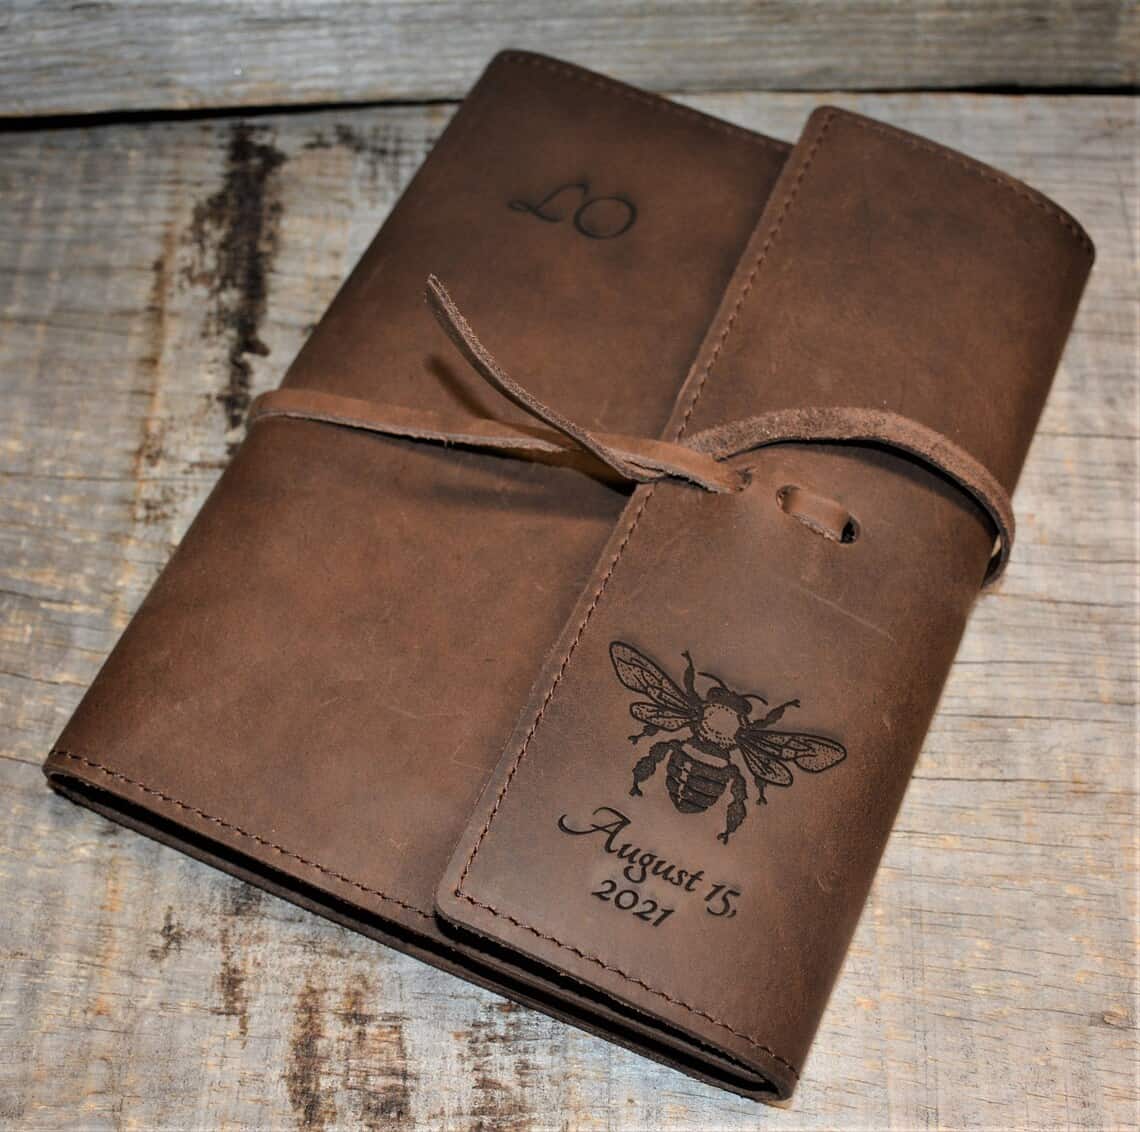 Personalized leather journal with bee on it and the date August 15, 2021 below it. 